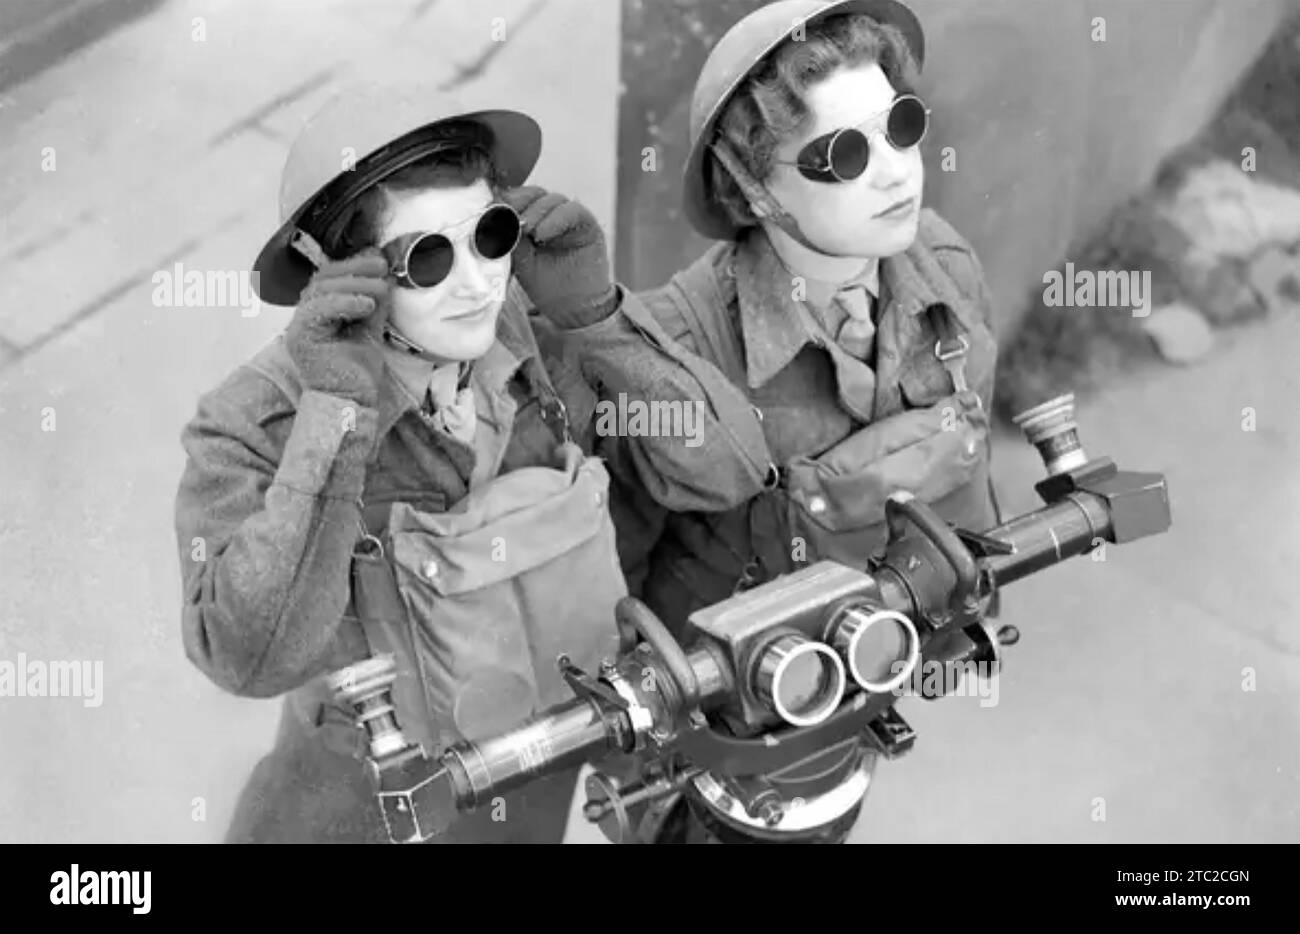 ATS  (Auxiliary Territorial Service) observers watching for German aircraft in 1940. They are wearing gas masks  and use the rangefinder in front of them to determine height and direction. Stock Photo